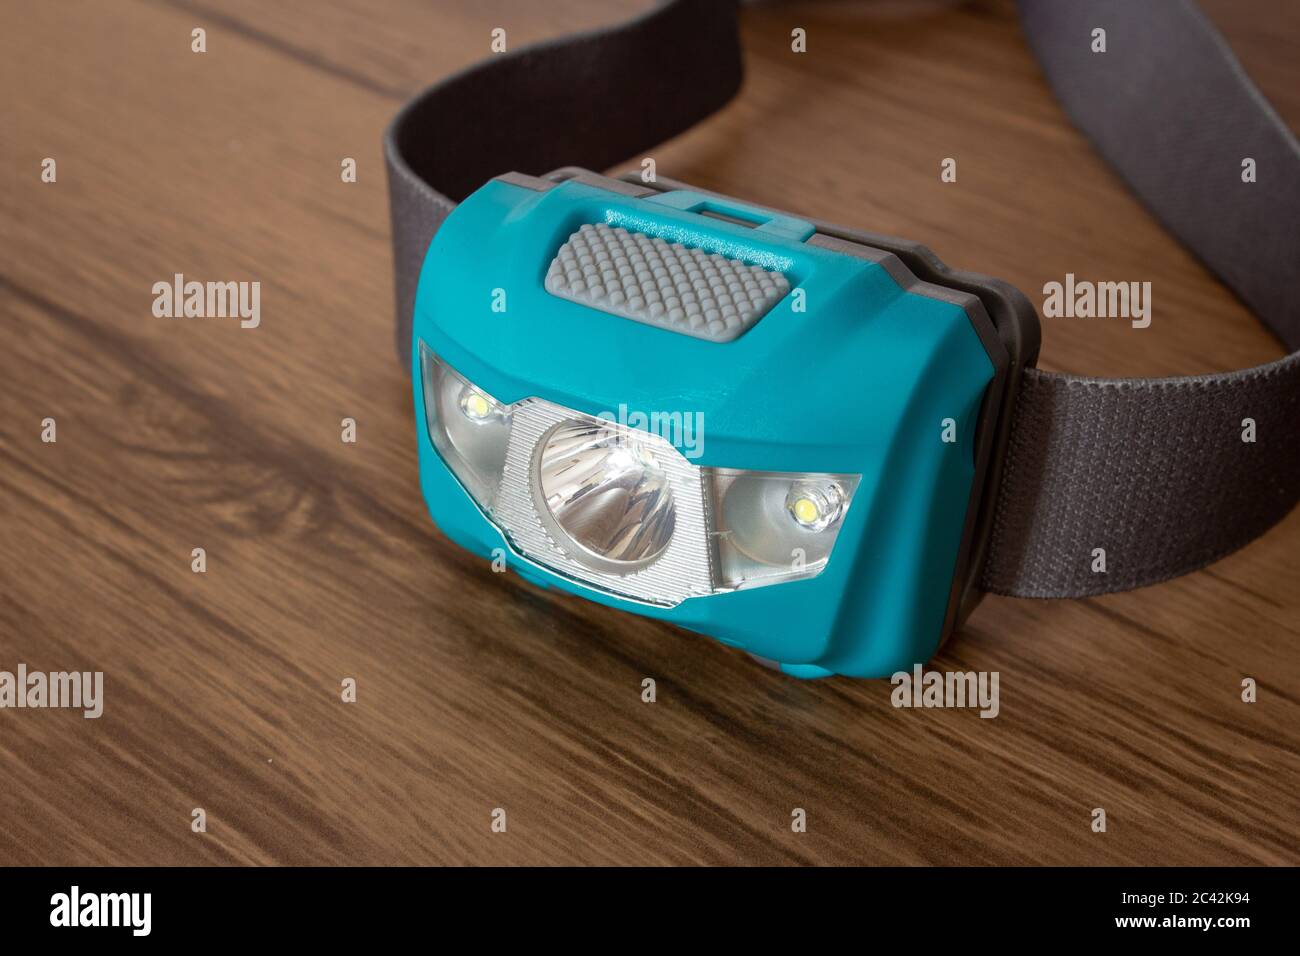 Teal led headlamp turned off on a wooden table showing the elastic strap Stock Photo